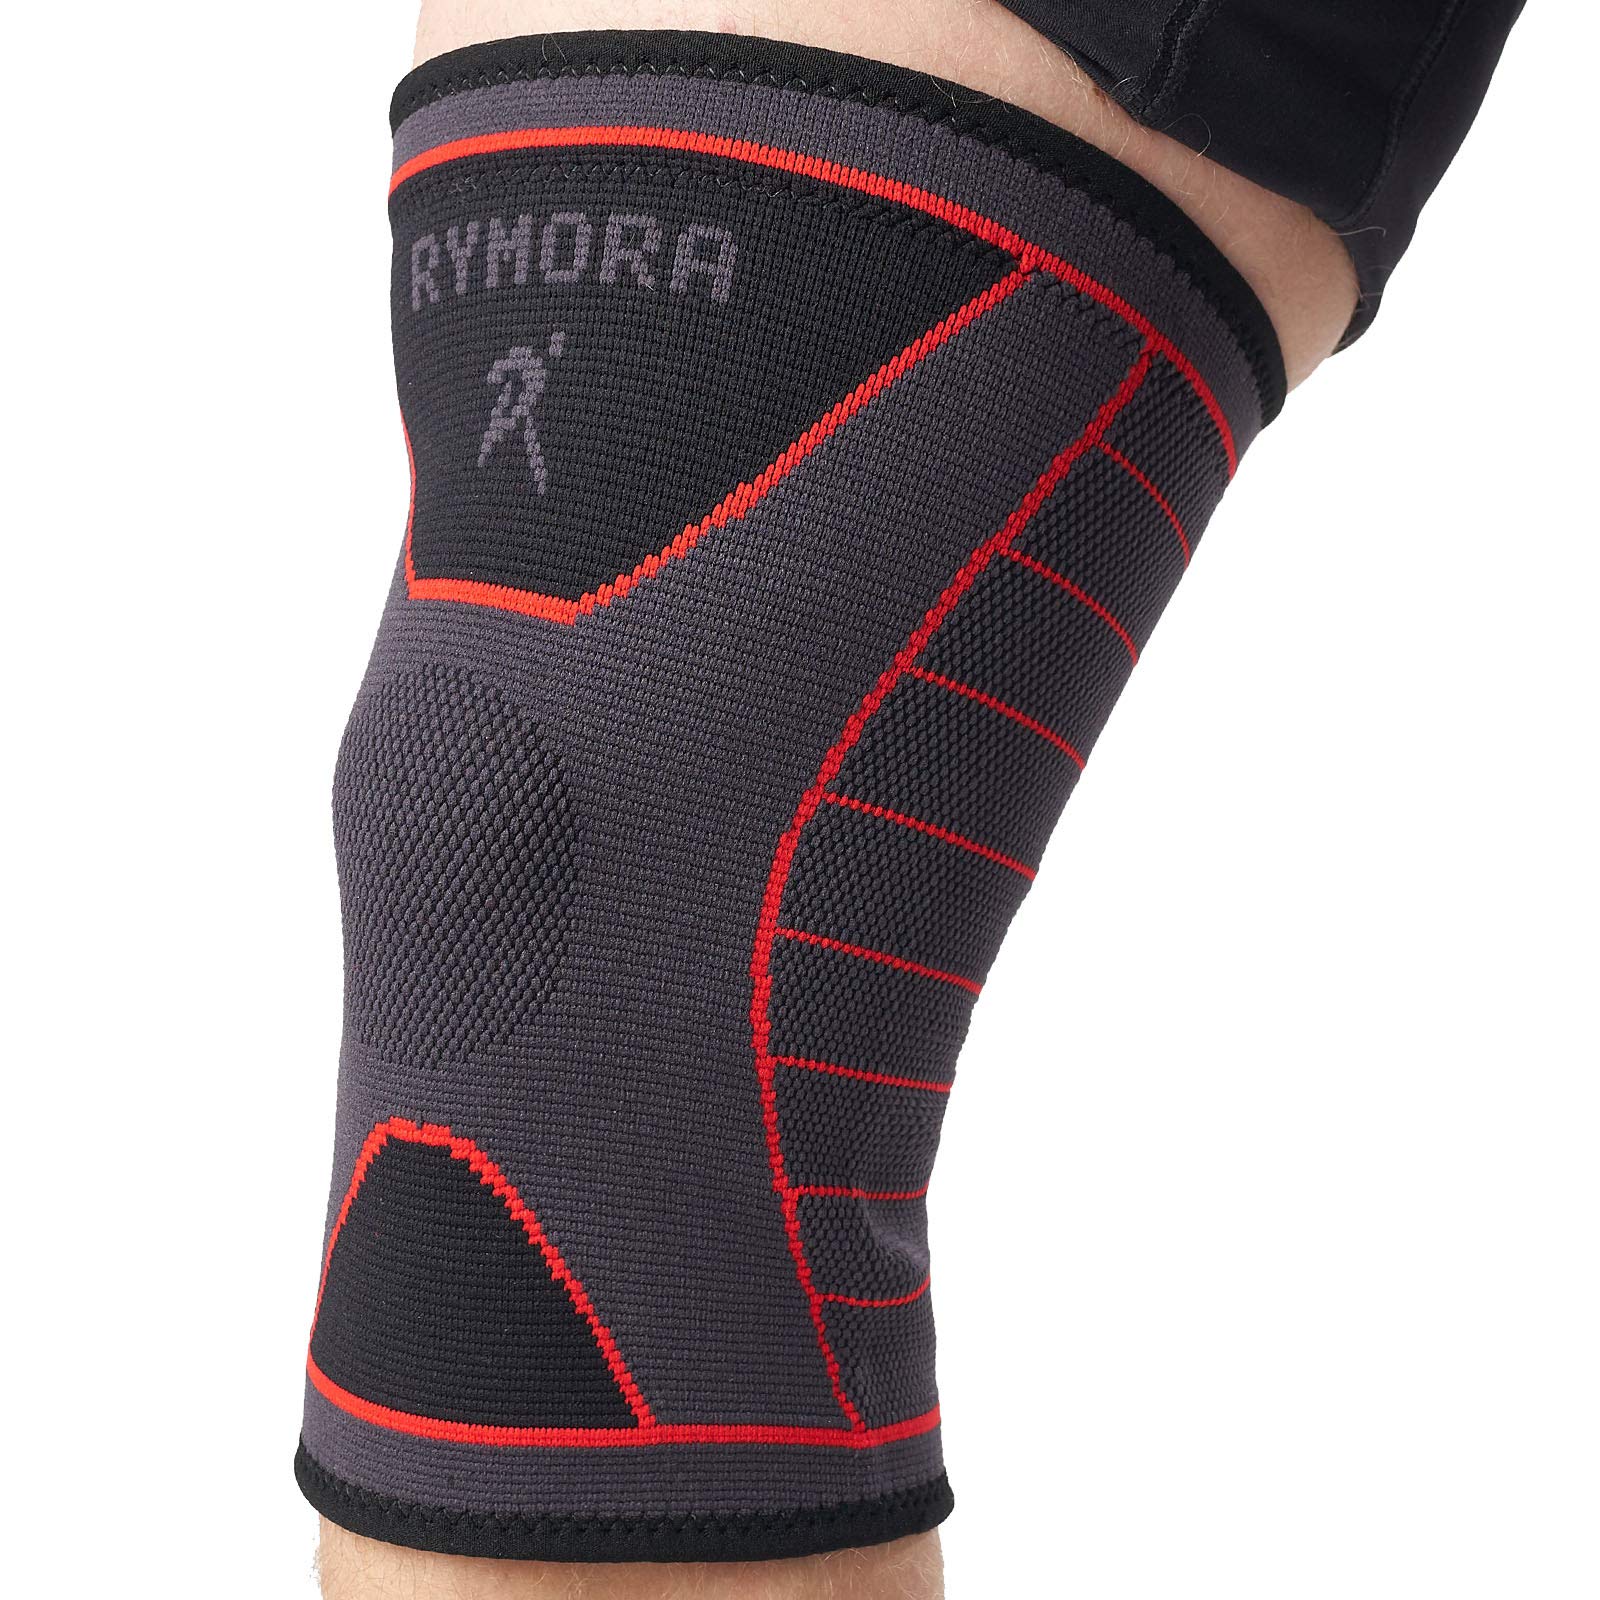 Rymora Knee Support Brace for Woman and Man- Knee Compression Sleeves  Comfortable and Secure Sleeve Supports